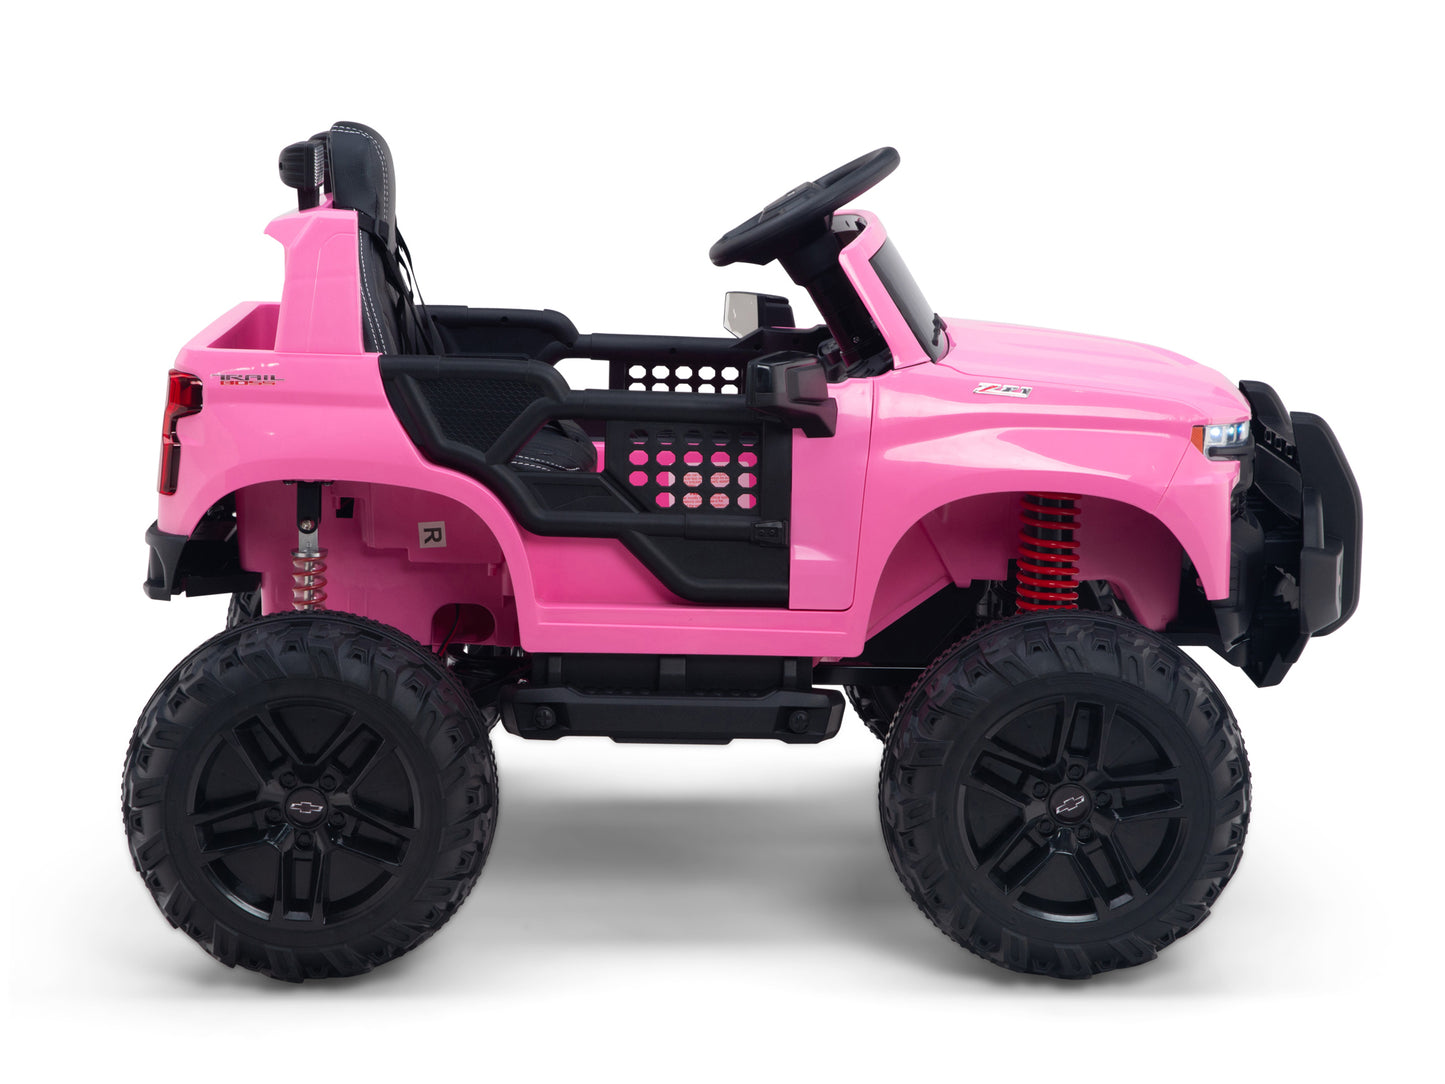 24V Chevrolet Silverado Lifted Ride On Truck with Remote Control – Pink